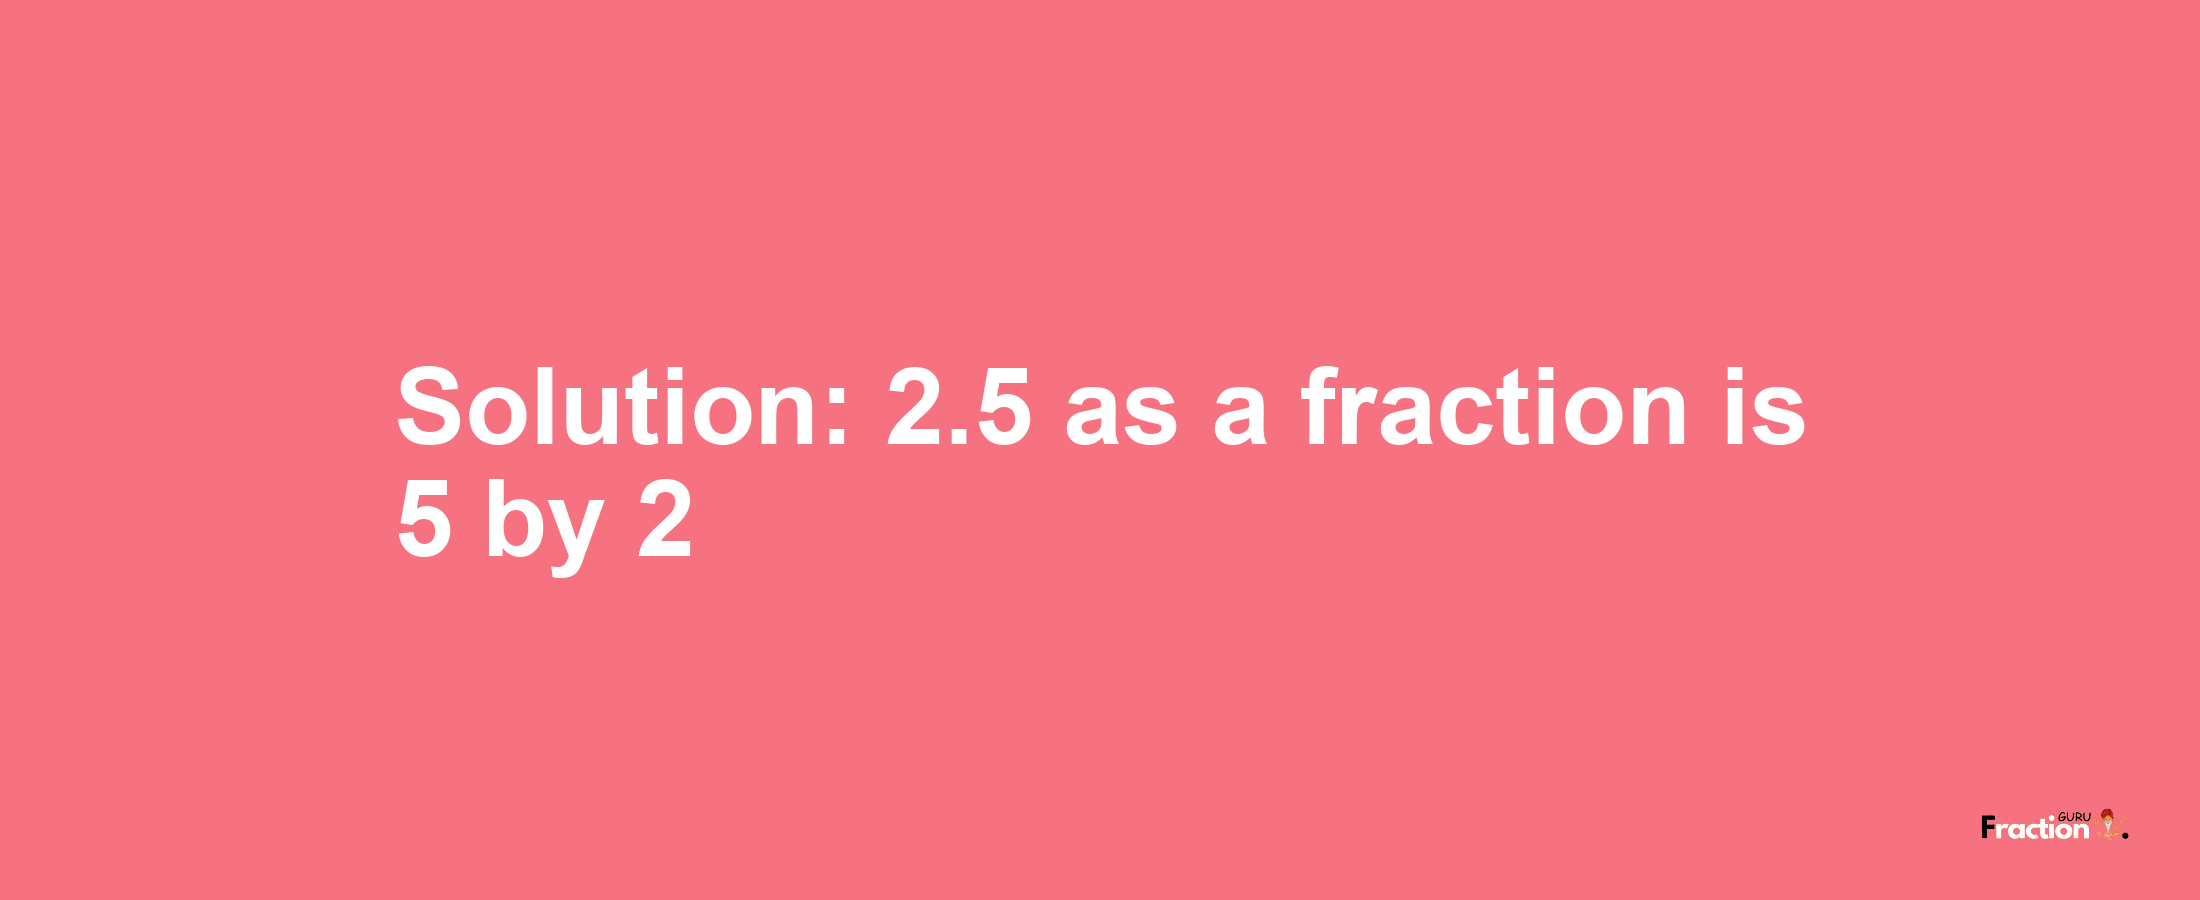 Solution:2.5 as a fraction is 5/2